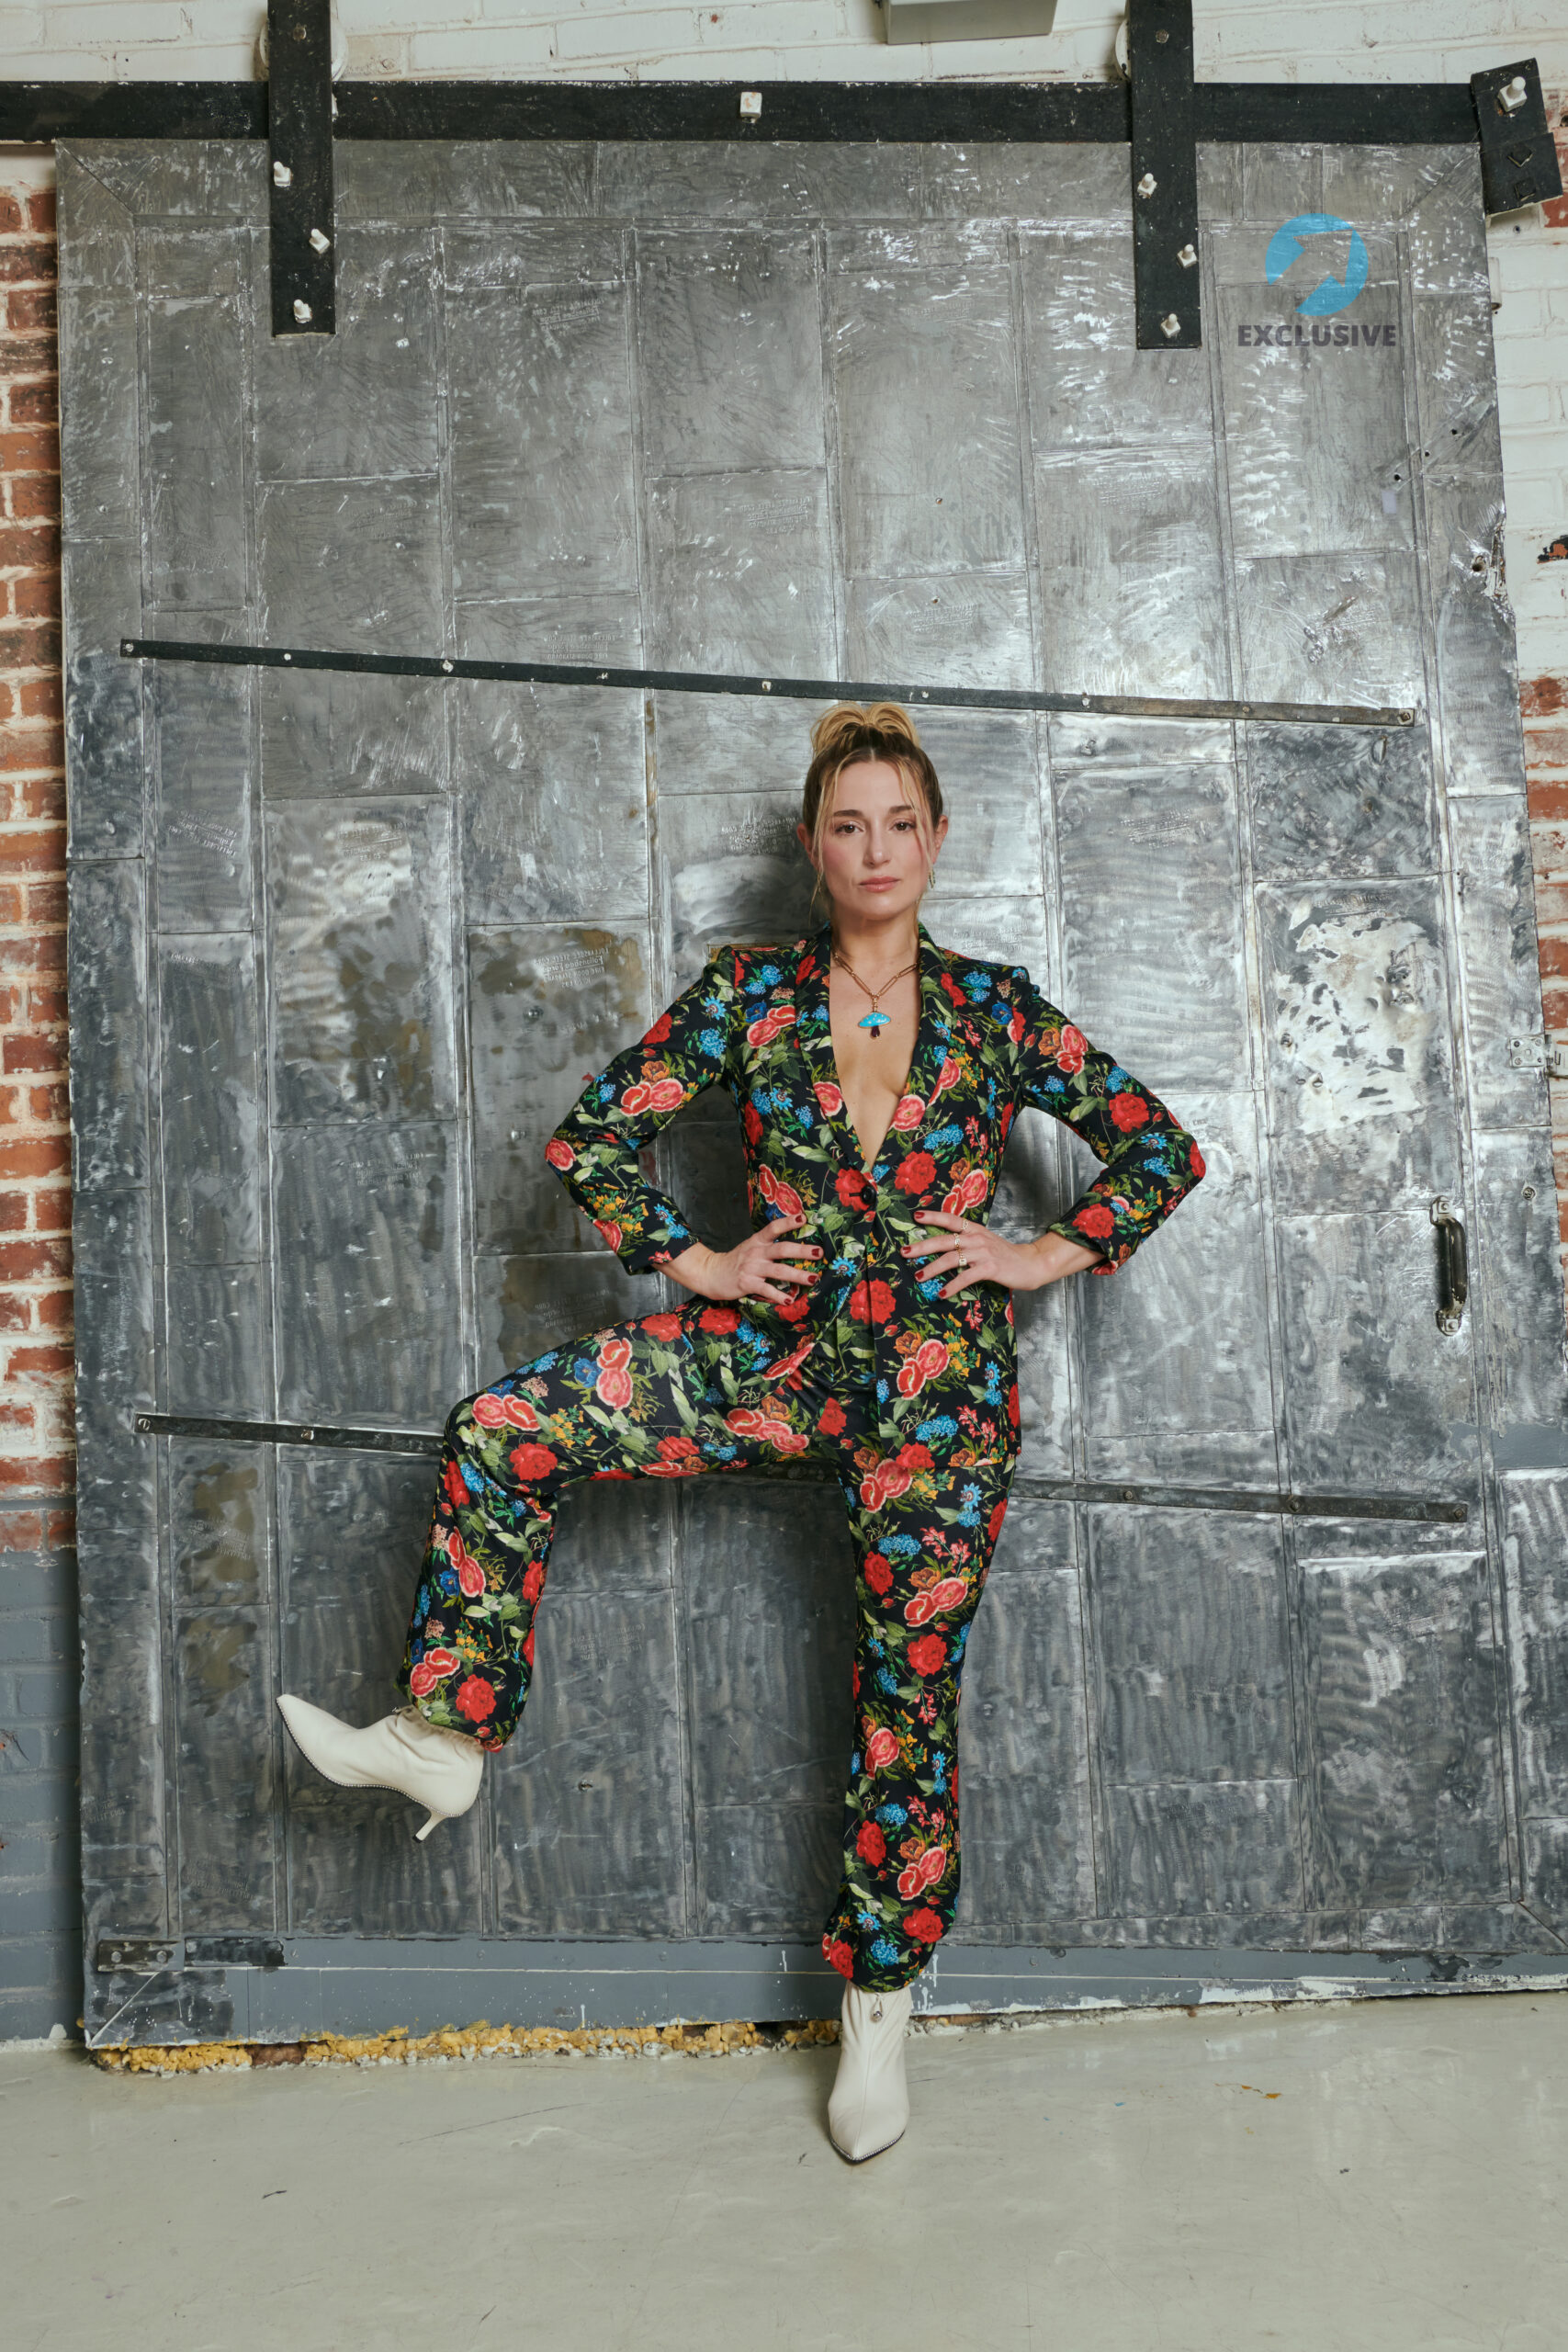 Jessica Lee Goldyn, photographed by Jenny Anderson, styled by Greg Dassonville for DassonVogue, hair by Justin Bowen, makeup by Katie LaMark. Suit from Alice and Olivia, shoes from Coach, jewelry from Suzy B Jewelry.